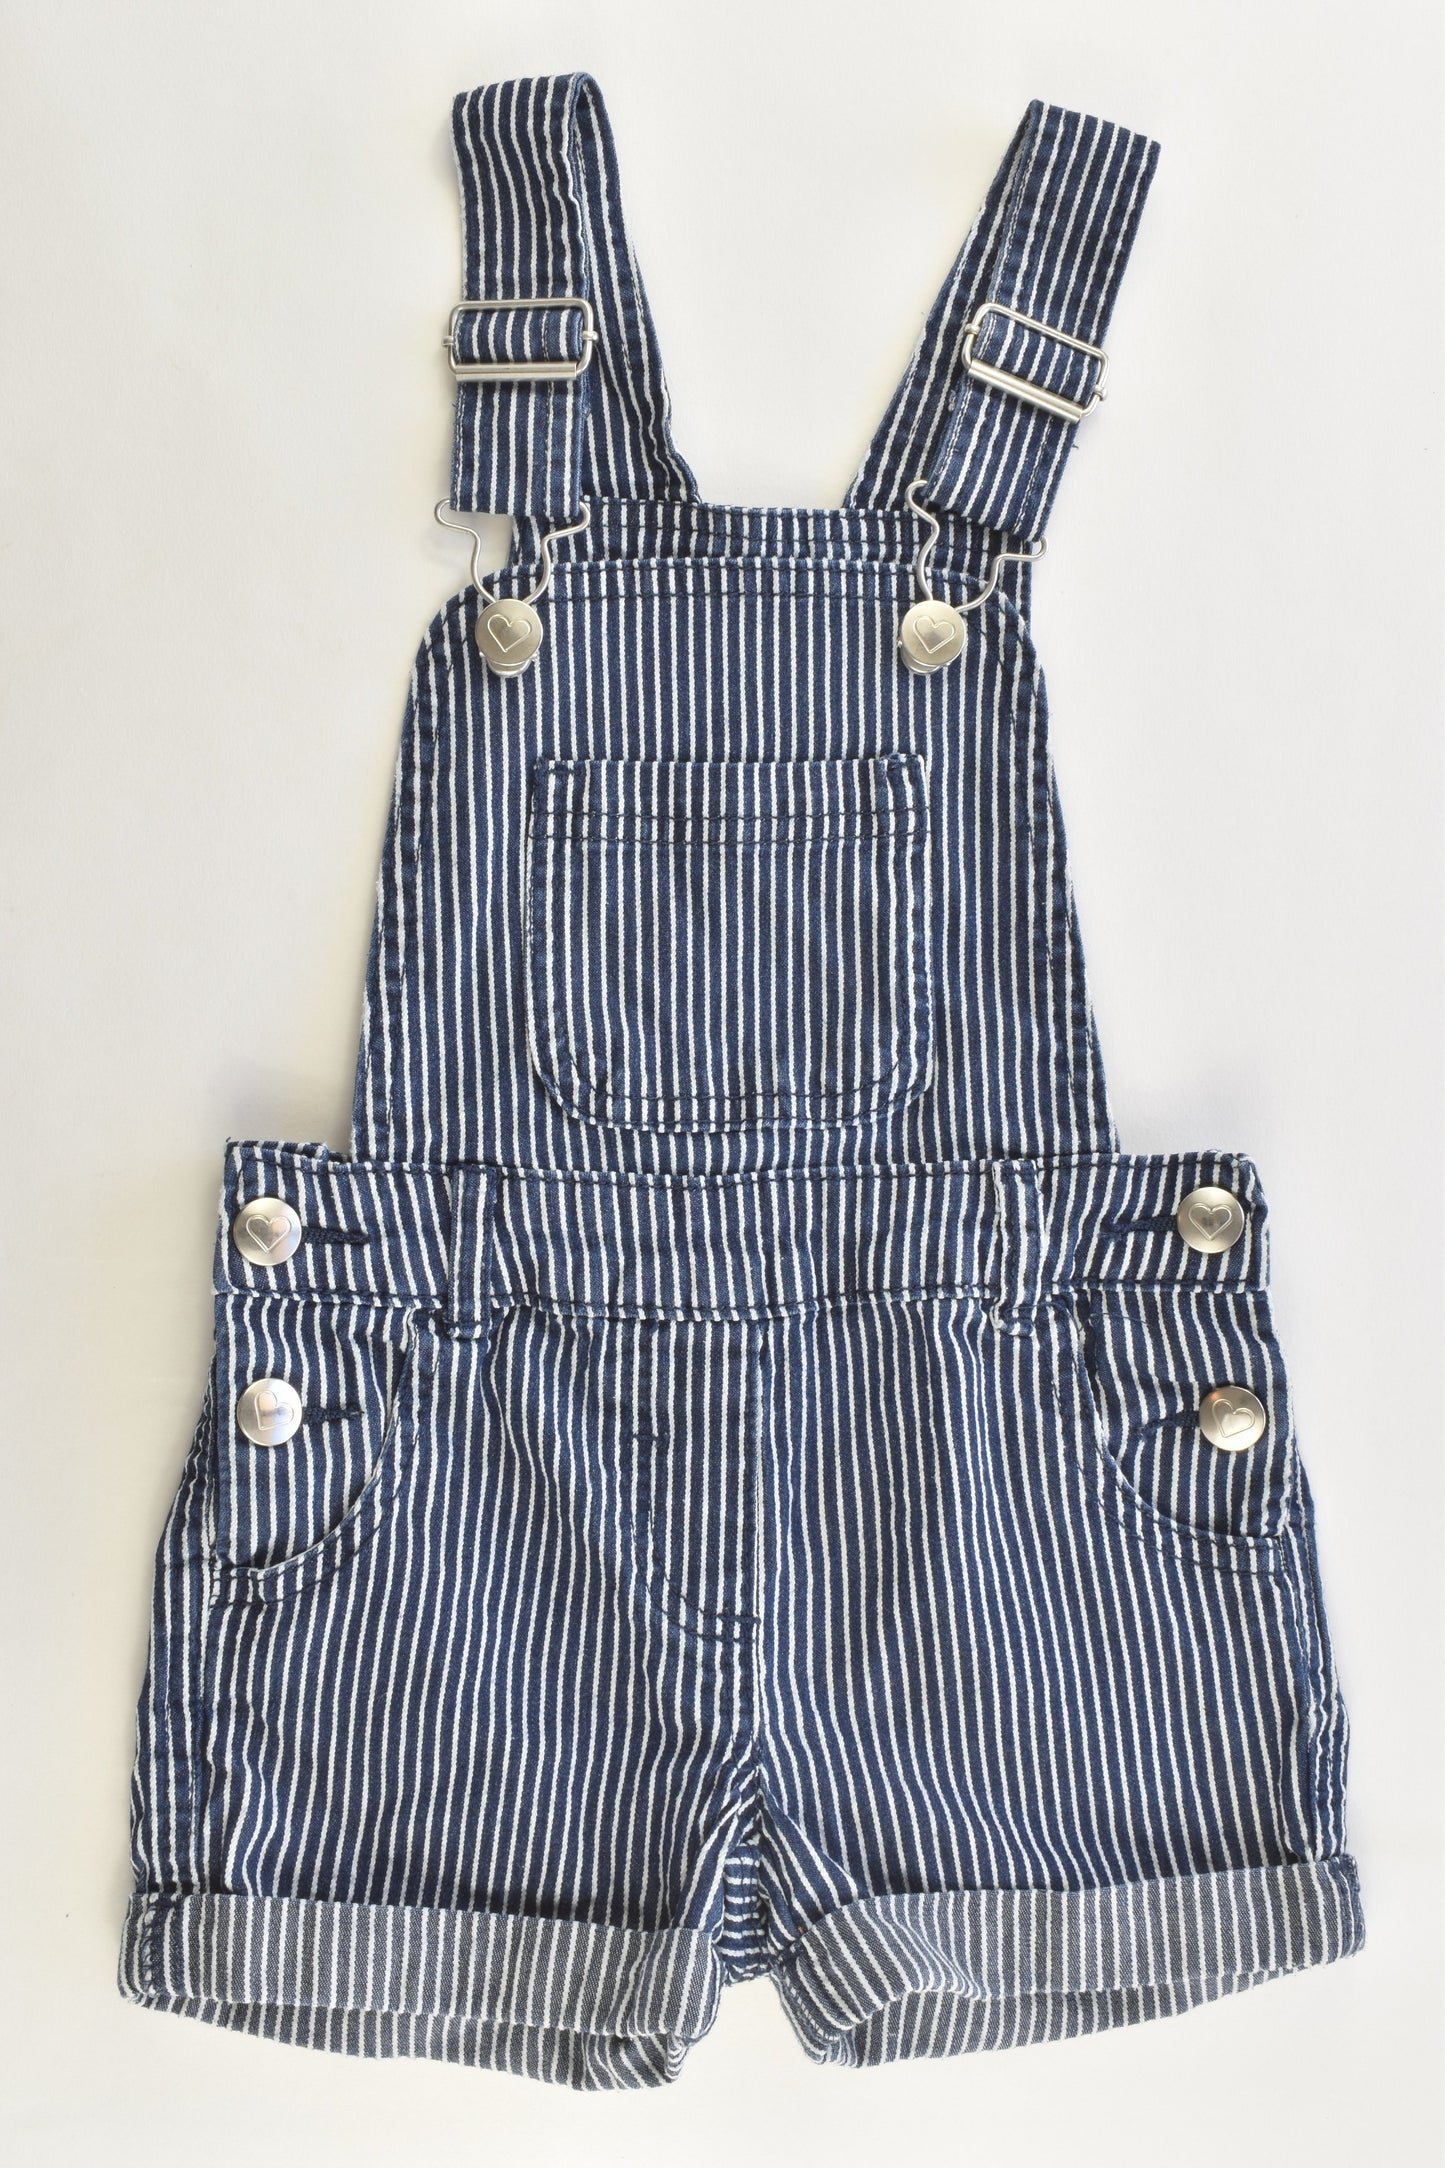 Kids & Co Size 3 Striped Stretchy Short Overalls